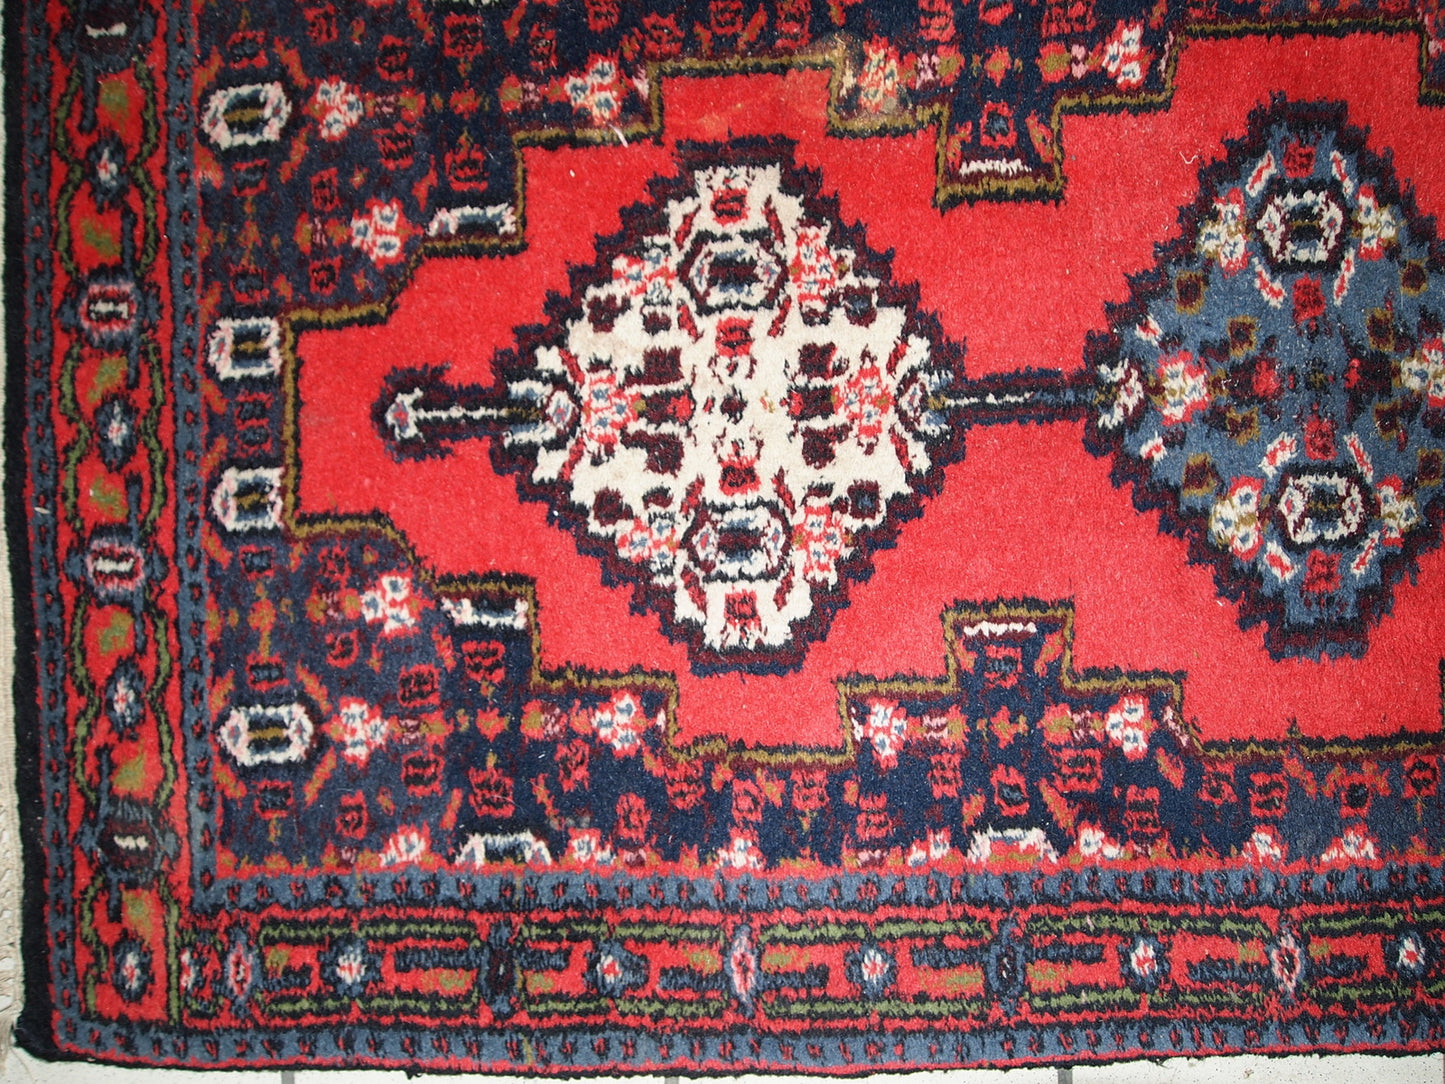 Handmade vintage Persian Hamadan rug in bright red color. The rug is in original good condition from the end of 20th century.